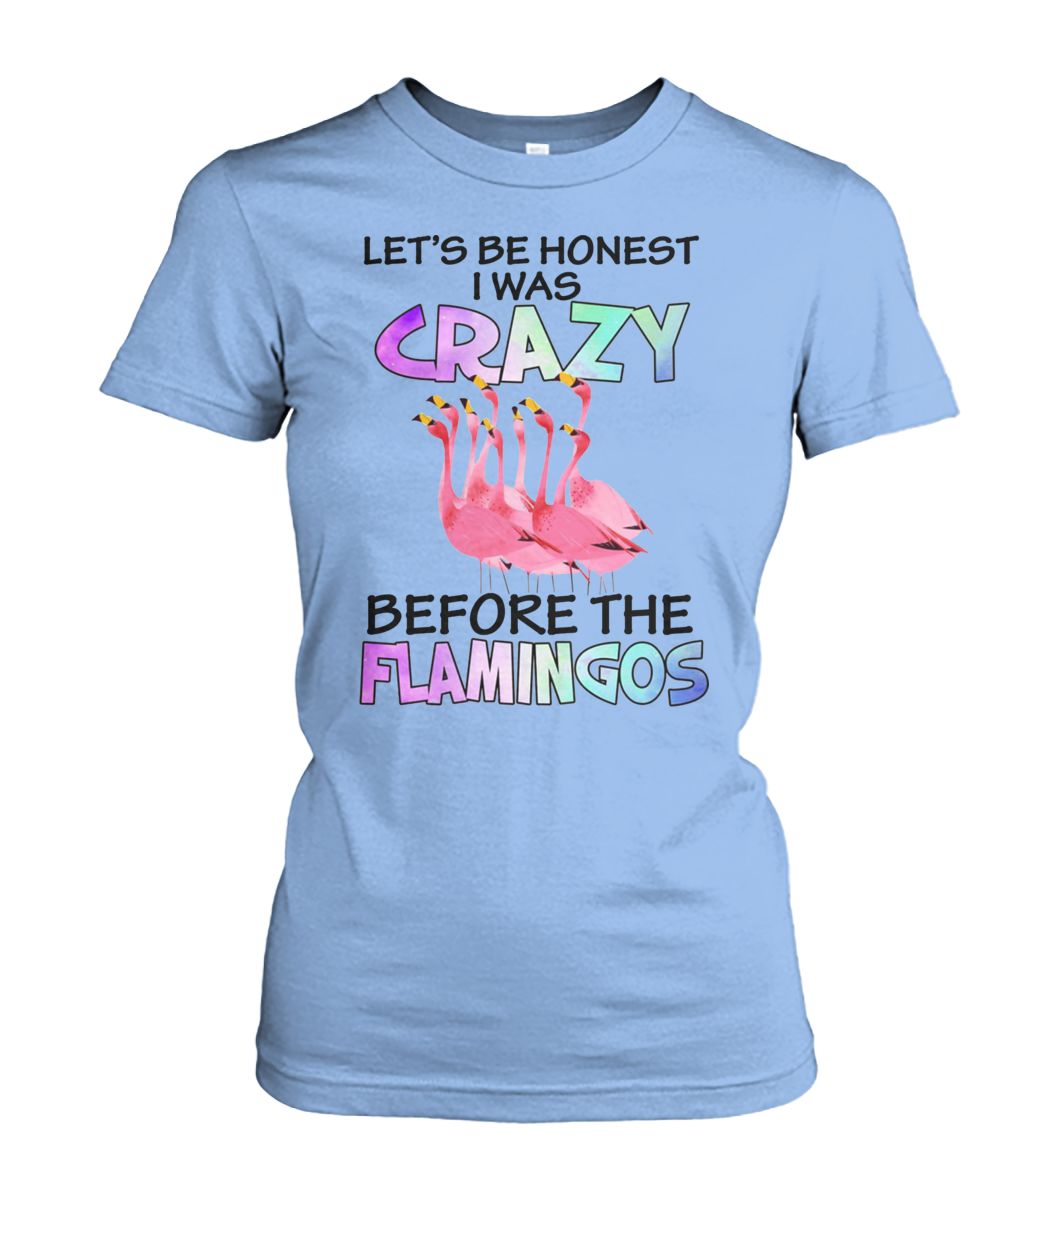 Let's be honest I was crazy before the flamingos women's crew tee